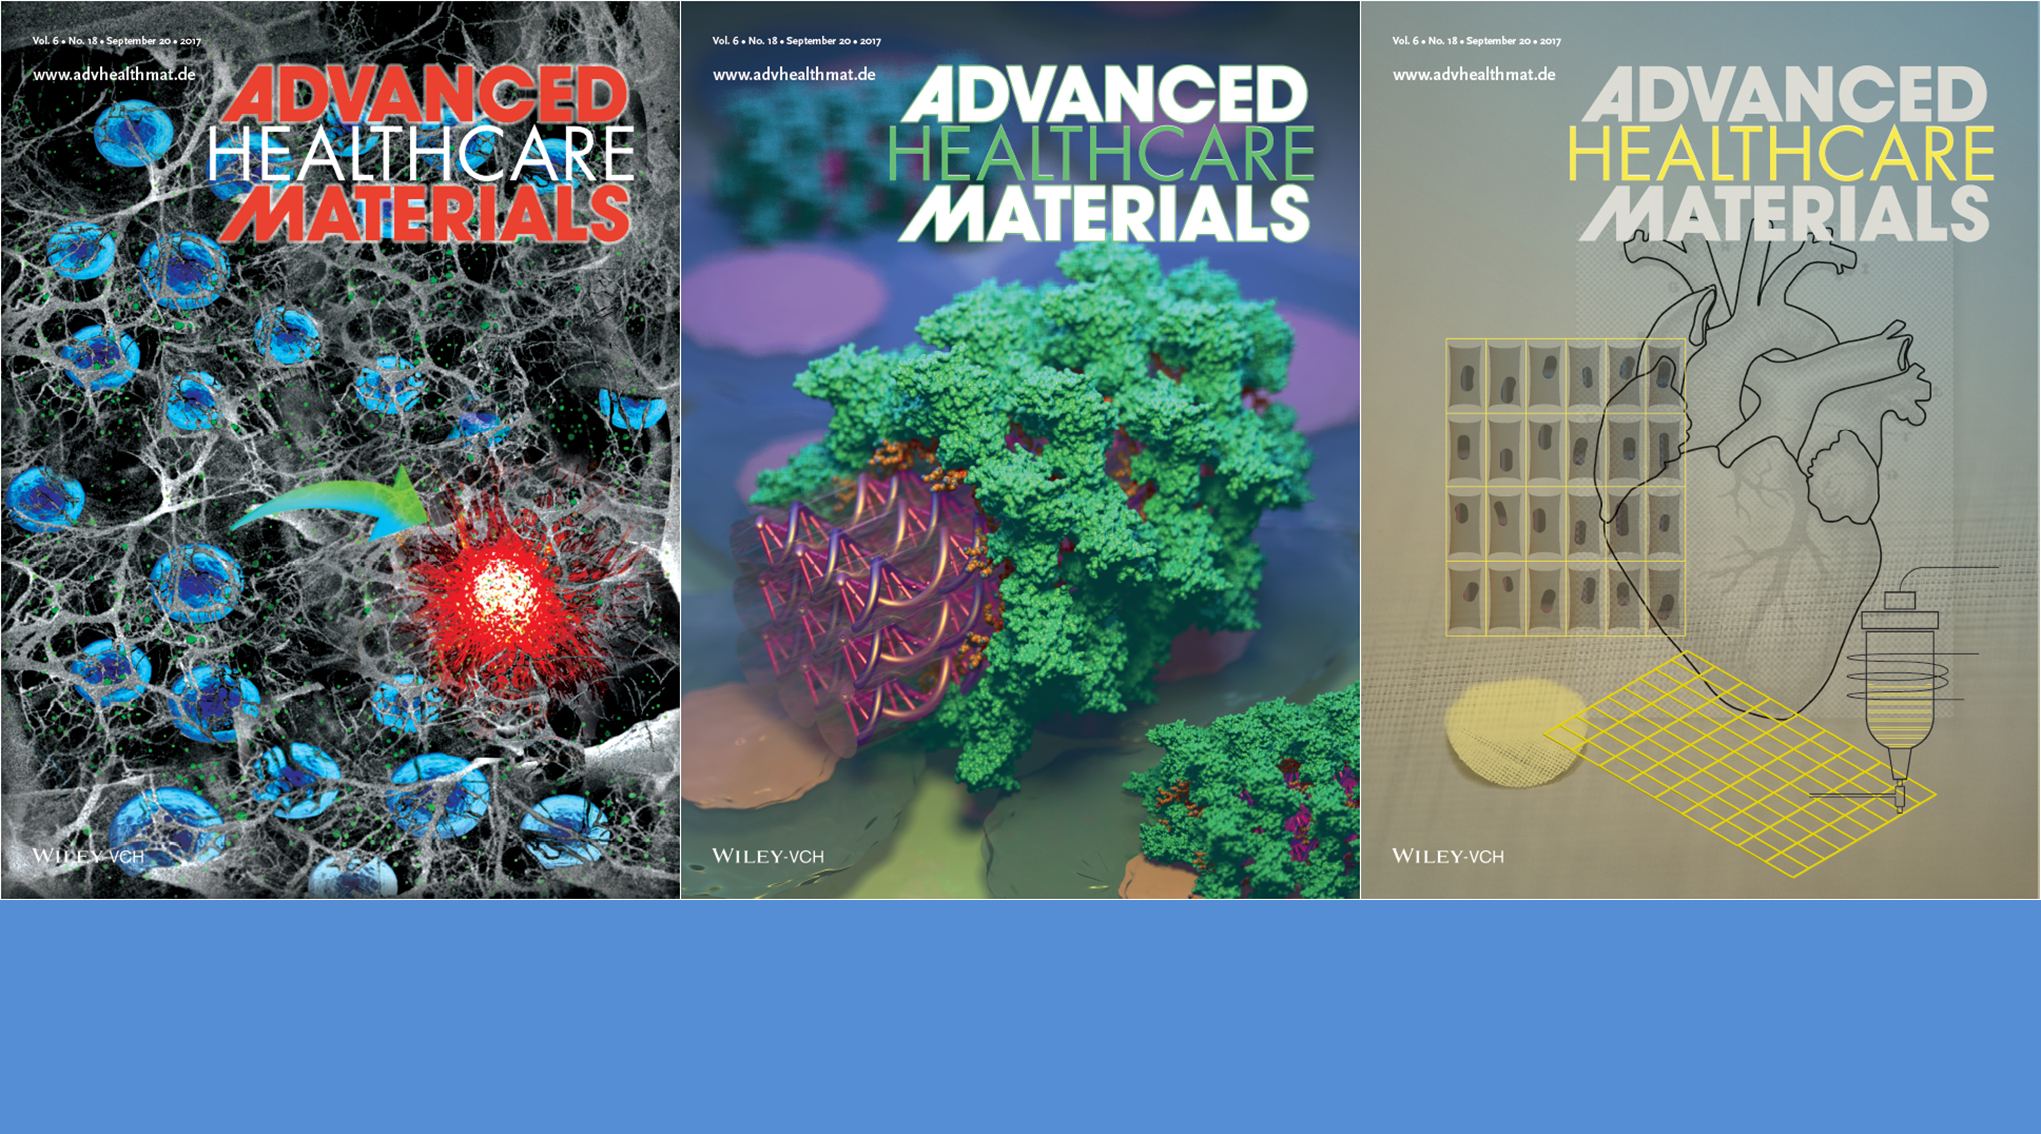 Origami B Cells Cover Art Featuring Dna Origami Cardiac Scaffolds And Stem Cells